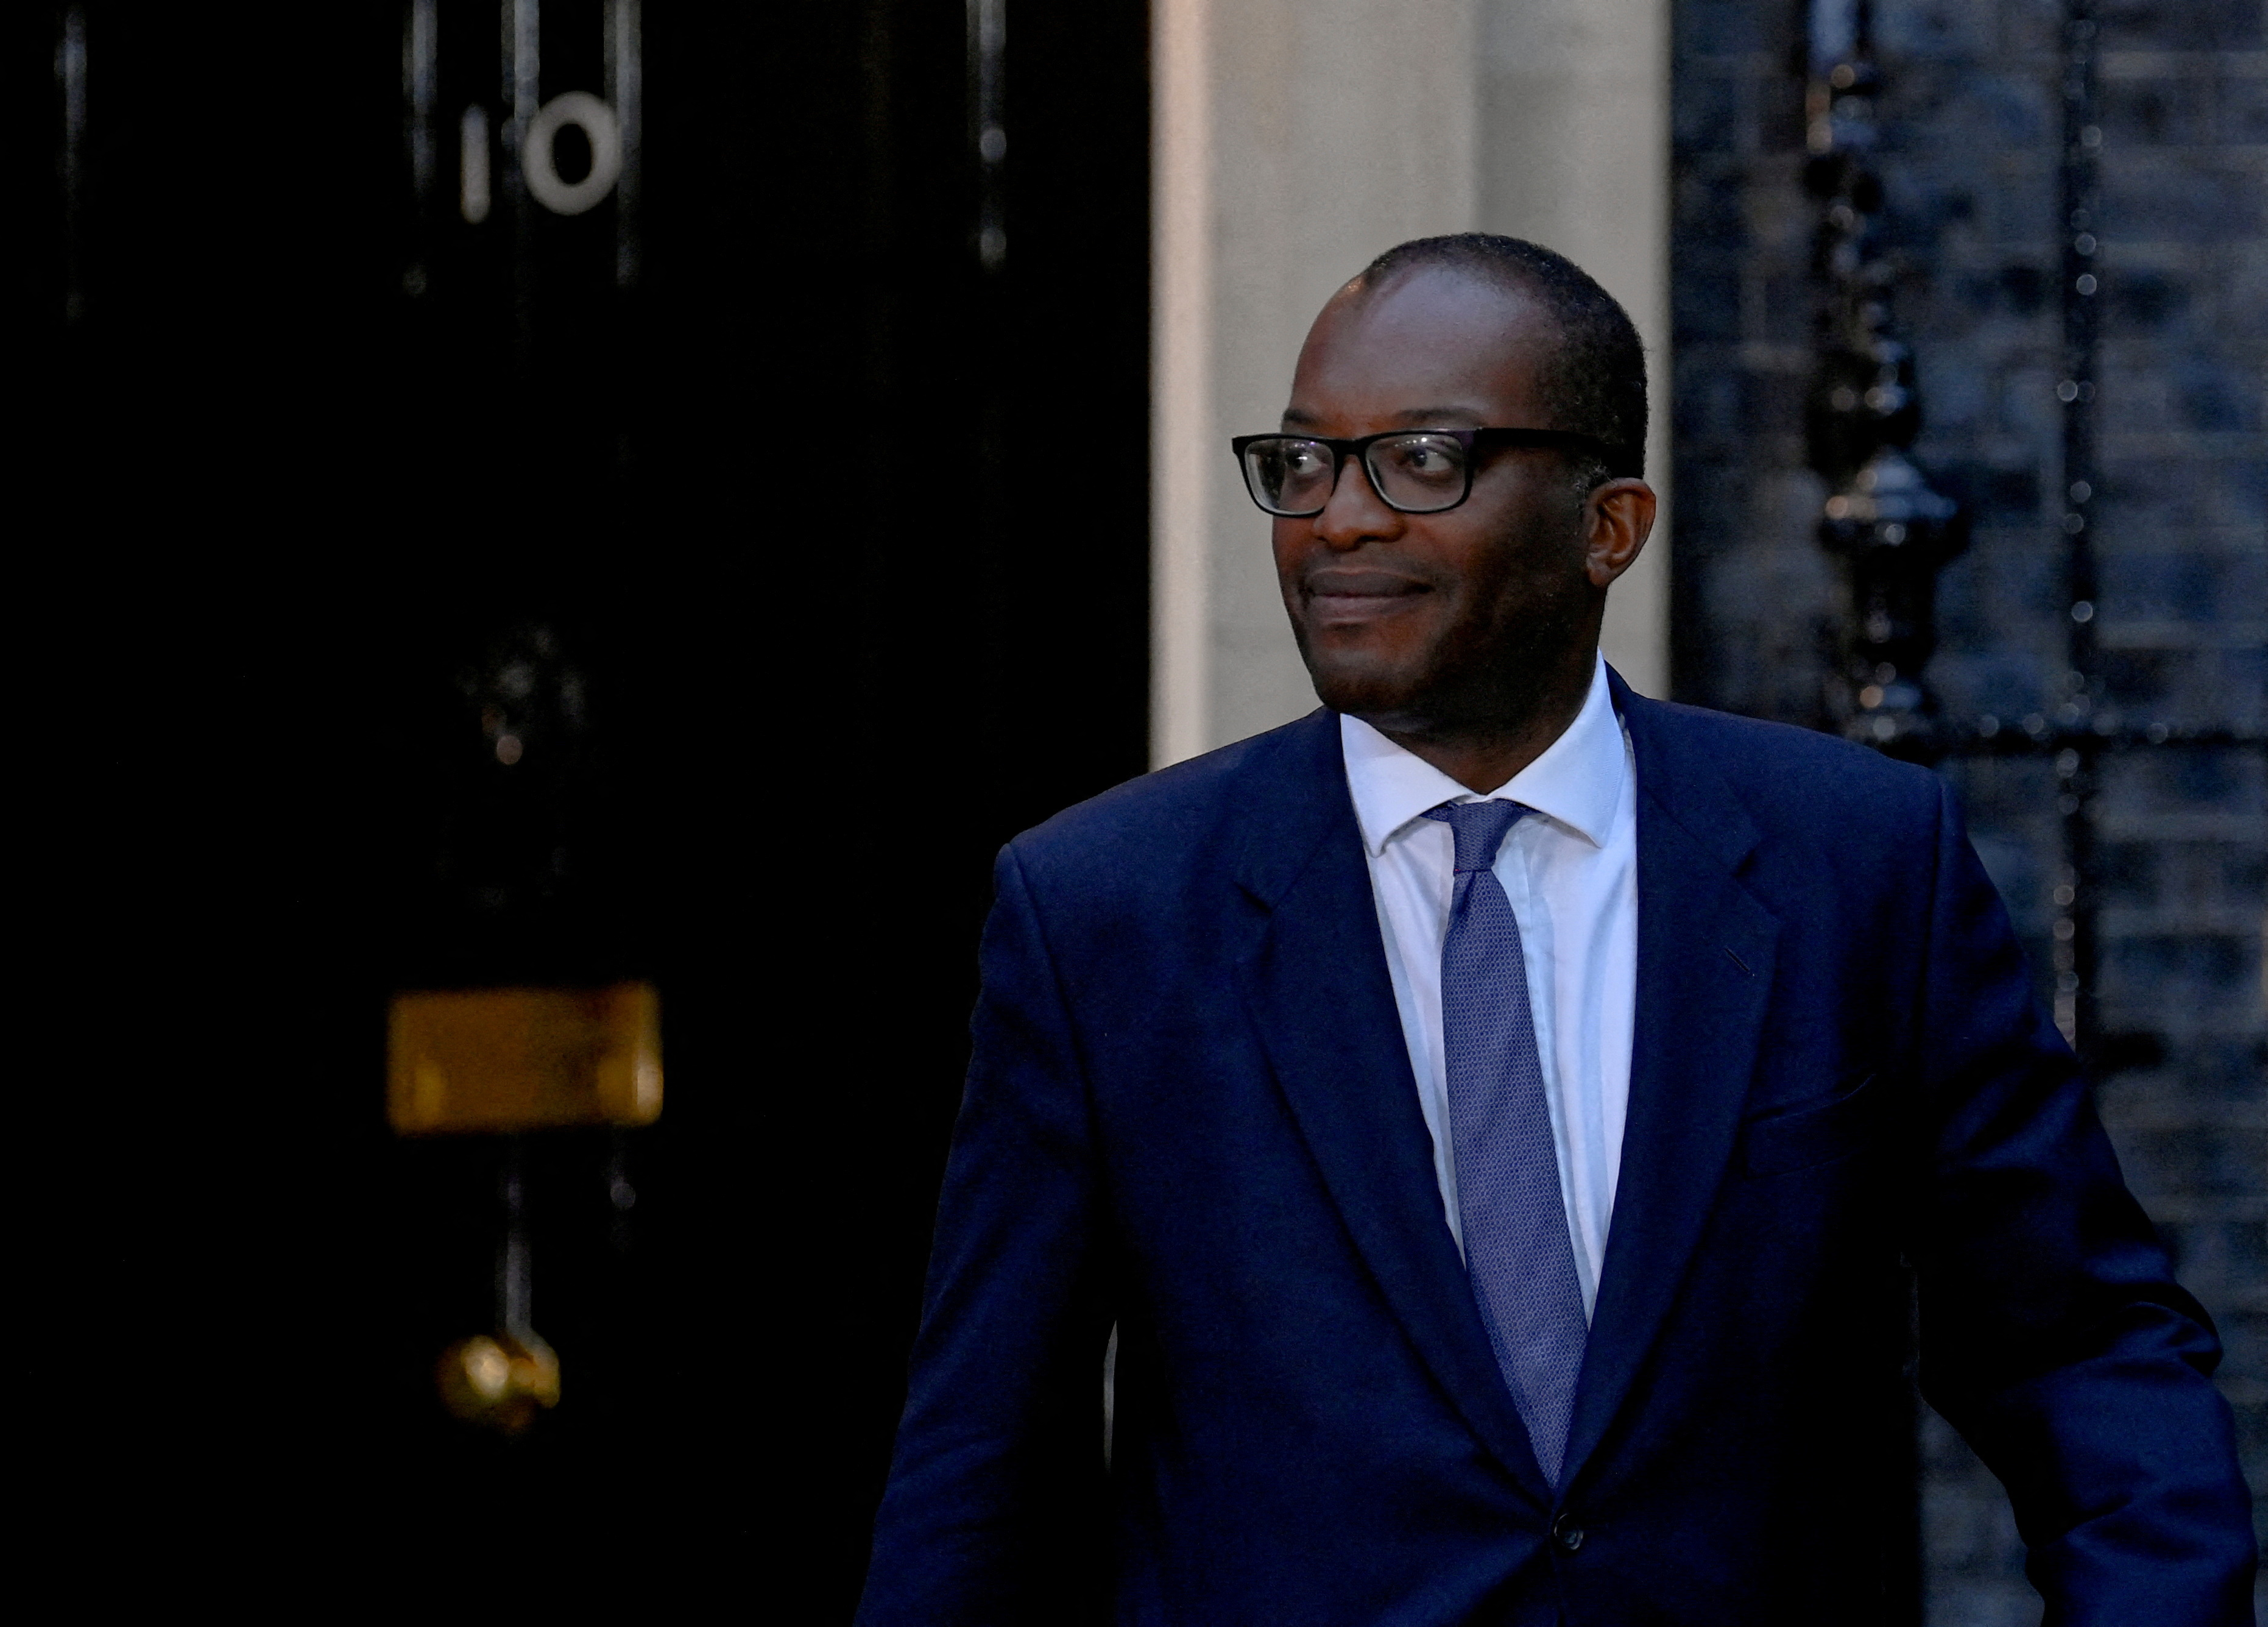 New British Chancellor of the Exchequer Kwasi Kwarteng walks outside Number 10 Downing Street in London